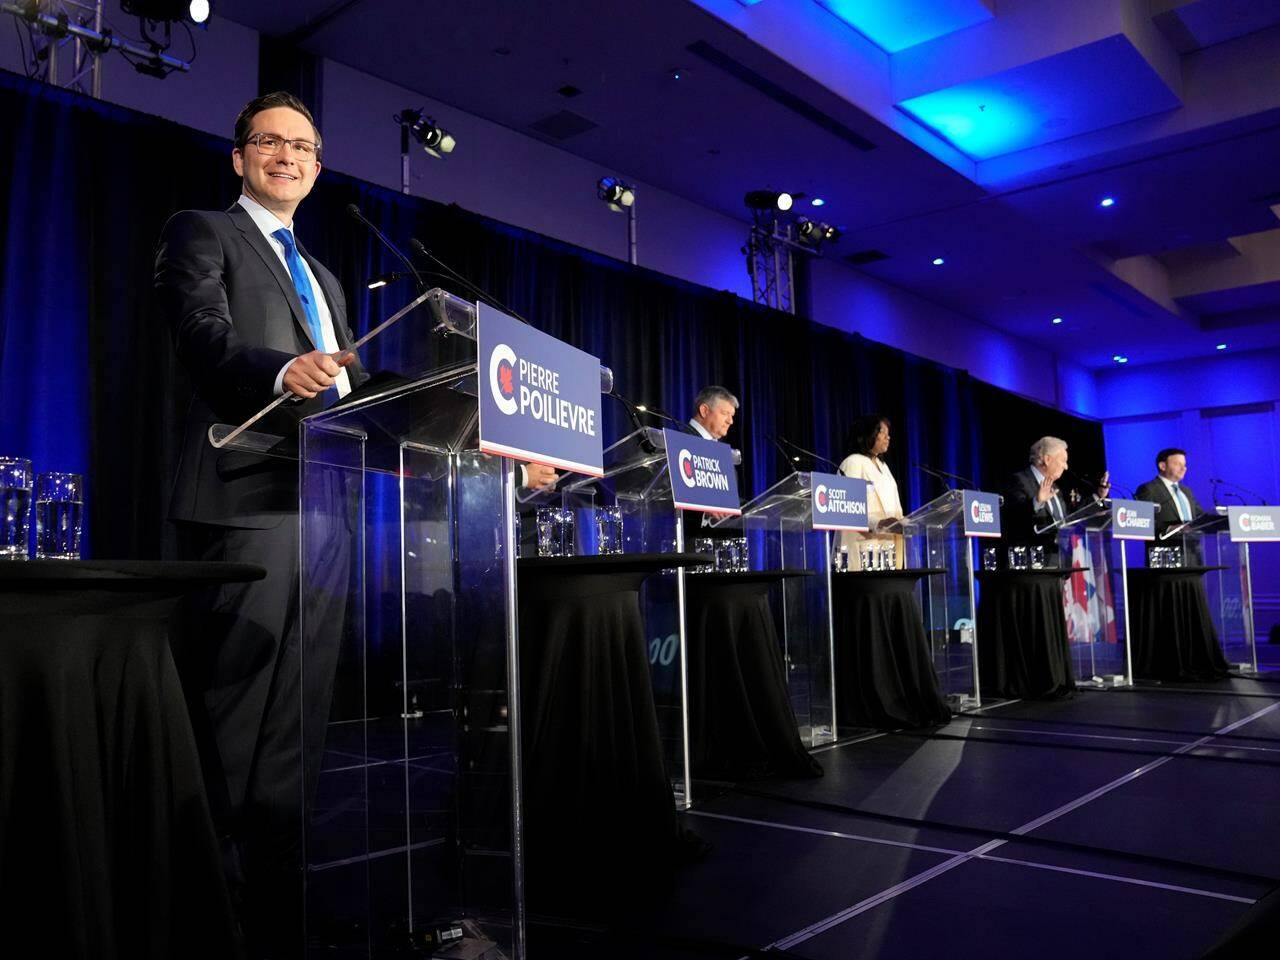 Conservative leadership hopeful Pierre Poilievre, left, smiles as he takes part in the Conservative Party of Canada French-language leadership debate in Laval, Quebec on Wednesday, May 25, 2022. The Conservative Party of Canada will announce its next leader in Ottawa tonight, after candidates and supporters spent the past seven months on its third leadership contest in six years. THE CANADIAN PRESS/Ryan Remiorz